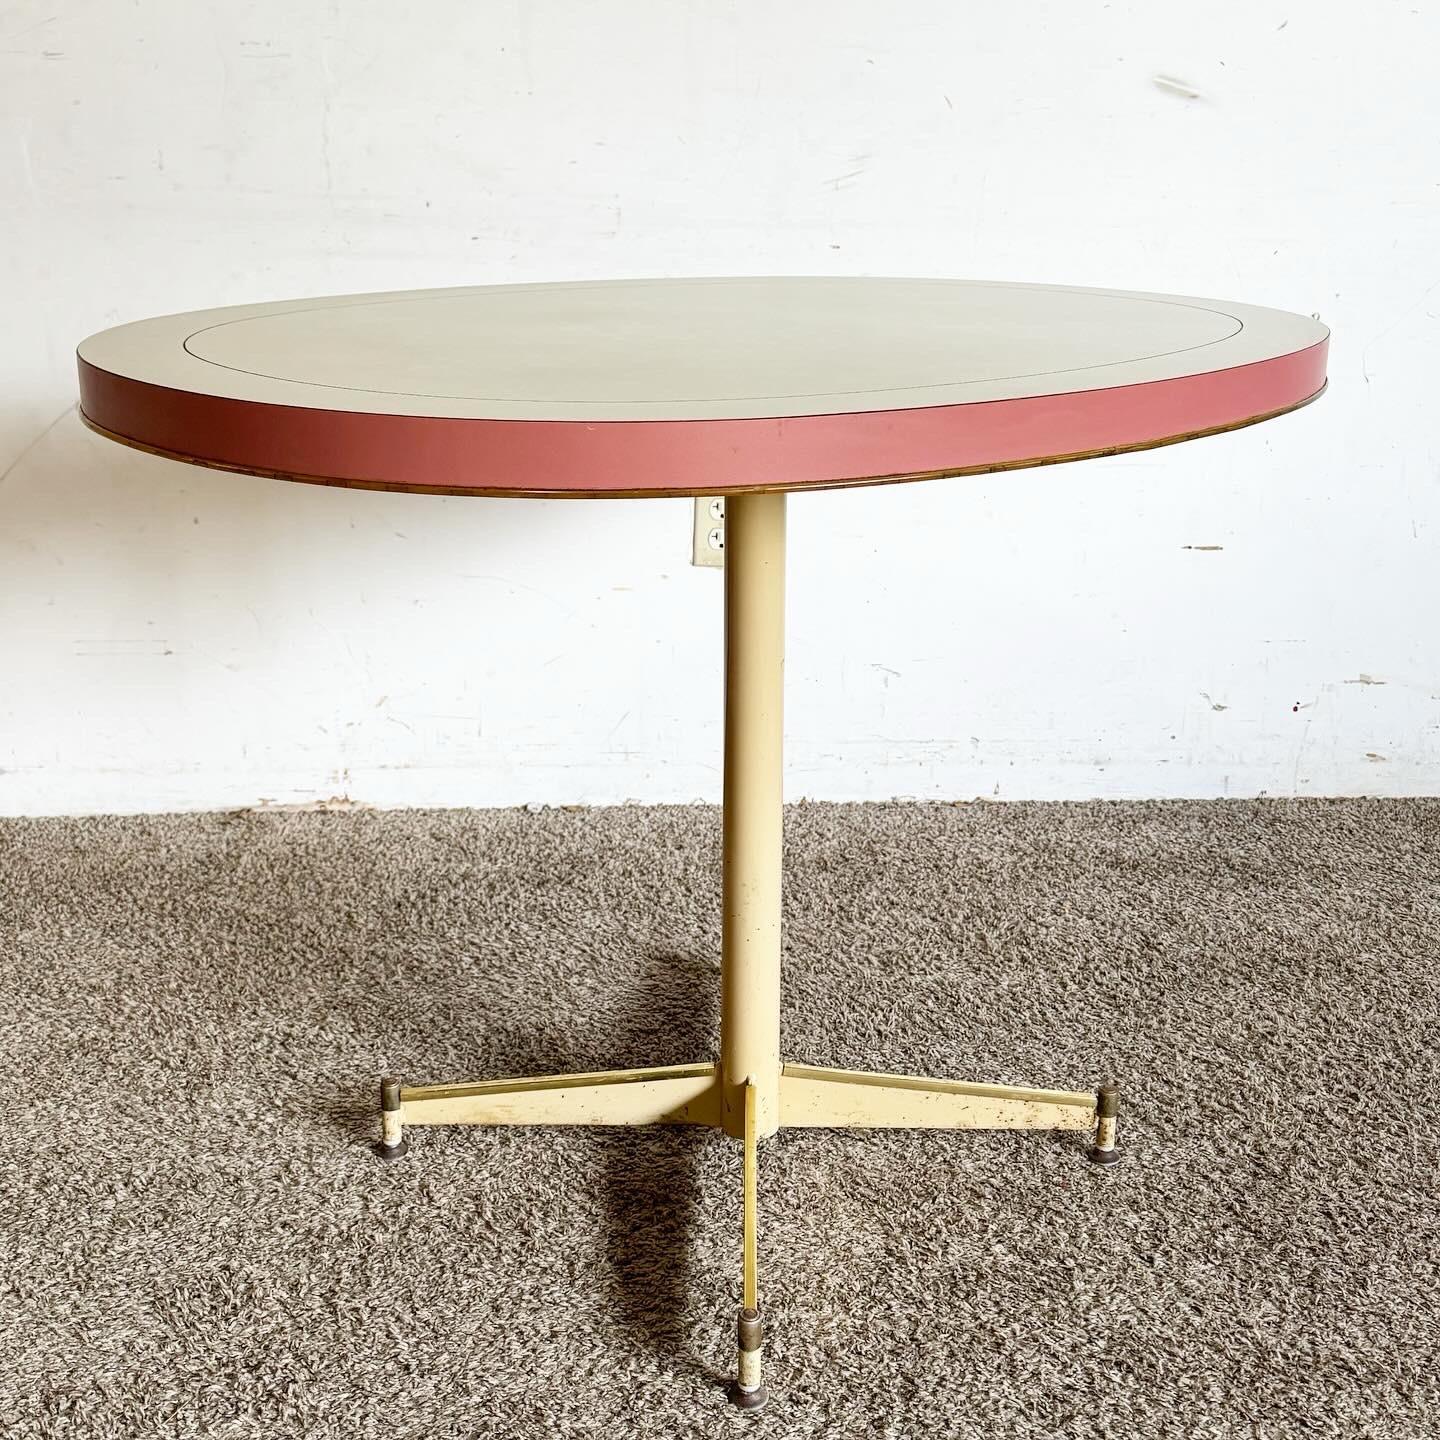 Embrace the retro allure with this Mid Century Modern Oval Dining Table, featuring a pink and white laminate top. Its distinctive oval shape and sleek, tapered legs capture the essence of mid-century aesthetics, making it a vibrant centerpiece for